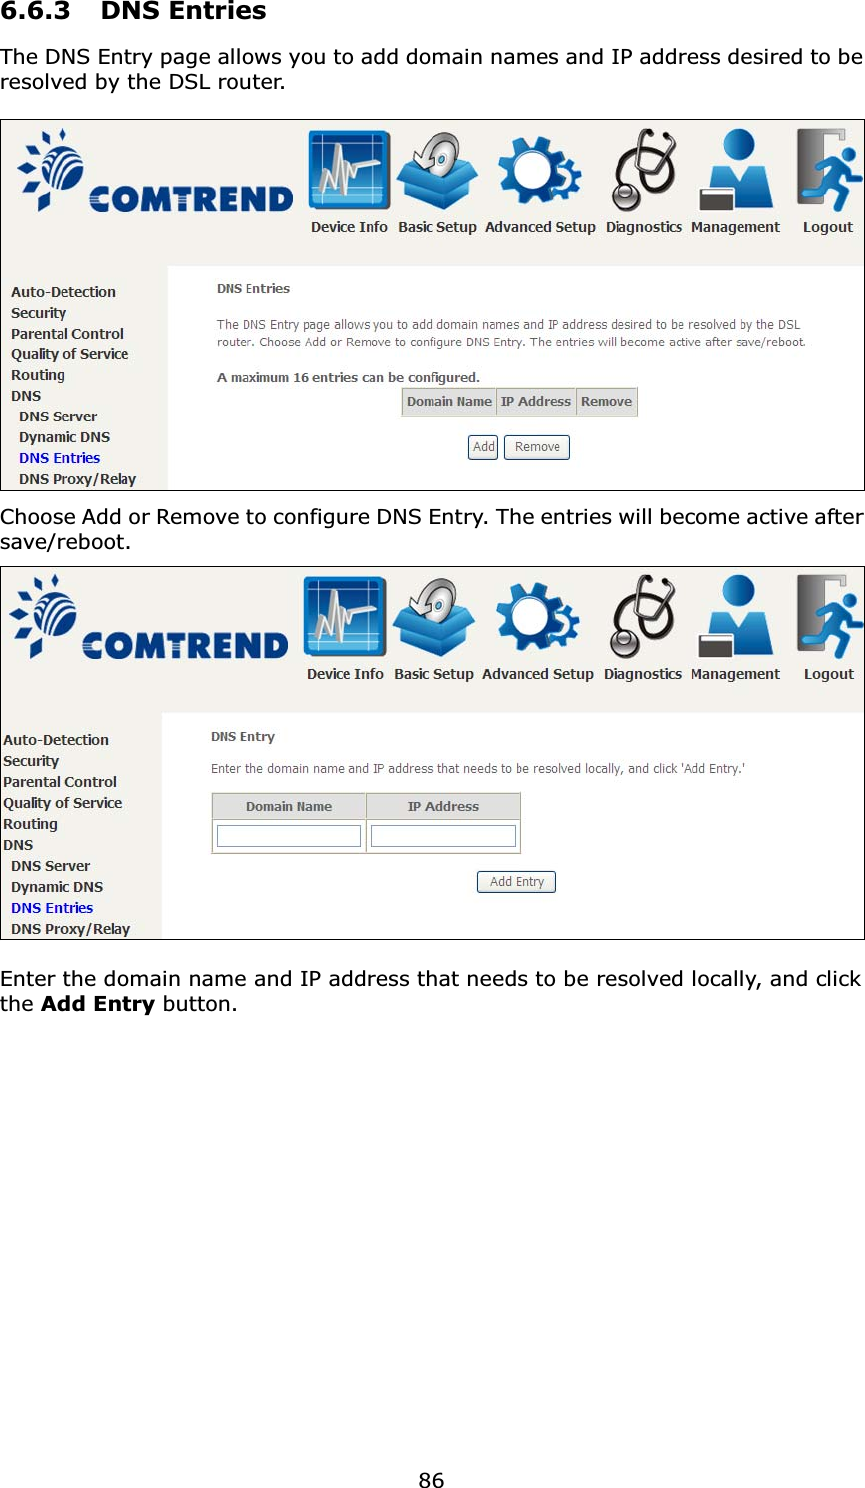 866.6.3 DNS EntriesThe DNS Entry page allows you to add domain names and IP address desired to be resolved by the DSL router. Choose Add or Remove to configure DNS Entry. The entries will become active after save/reboot.Enter the domain name and IP address that needs to be resolved locally, and click the Add Entry button.  